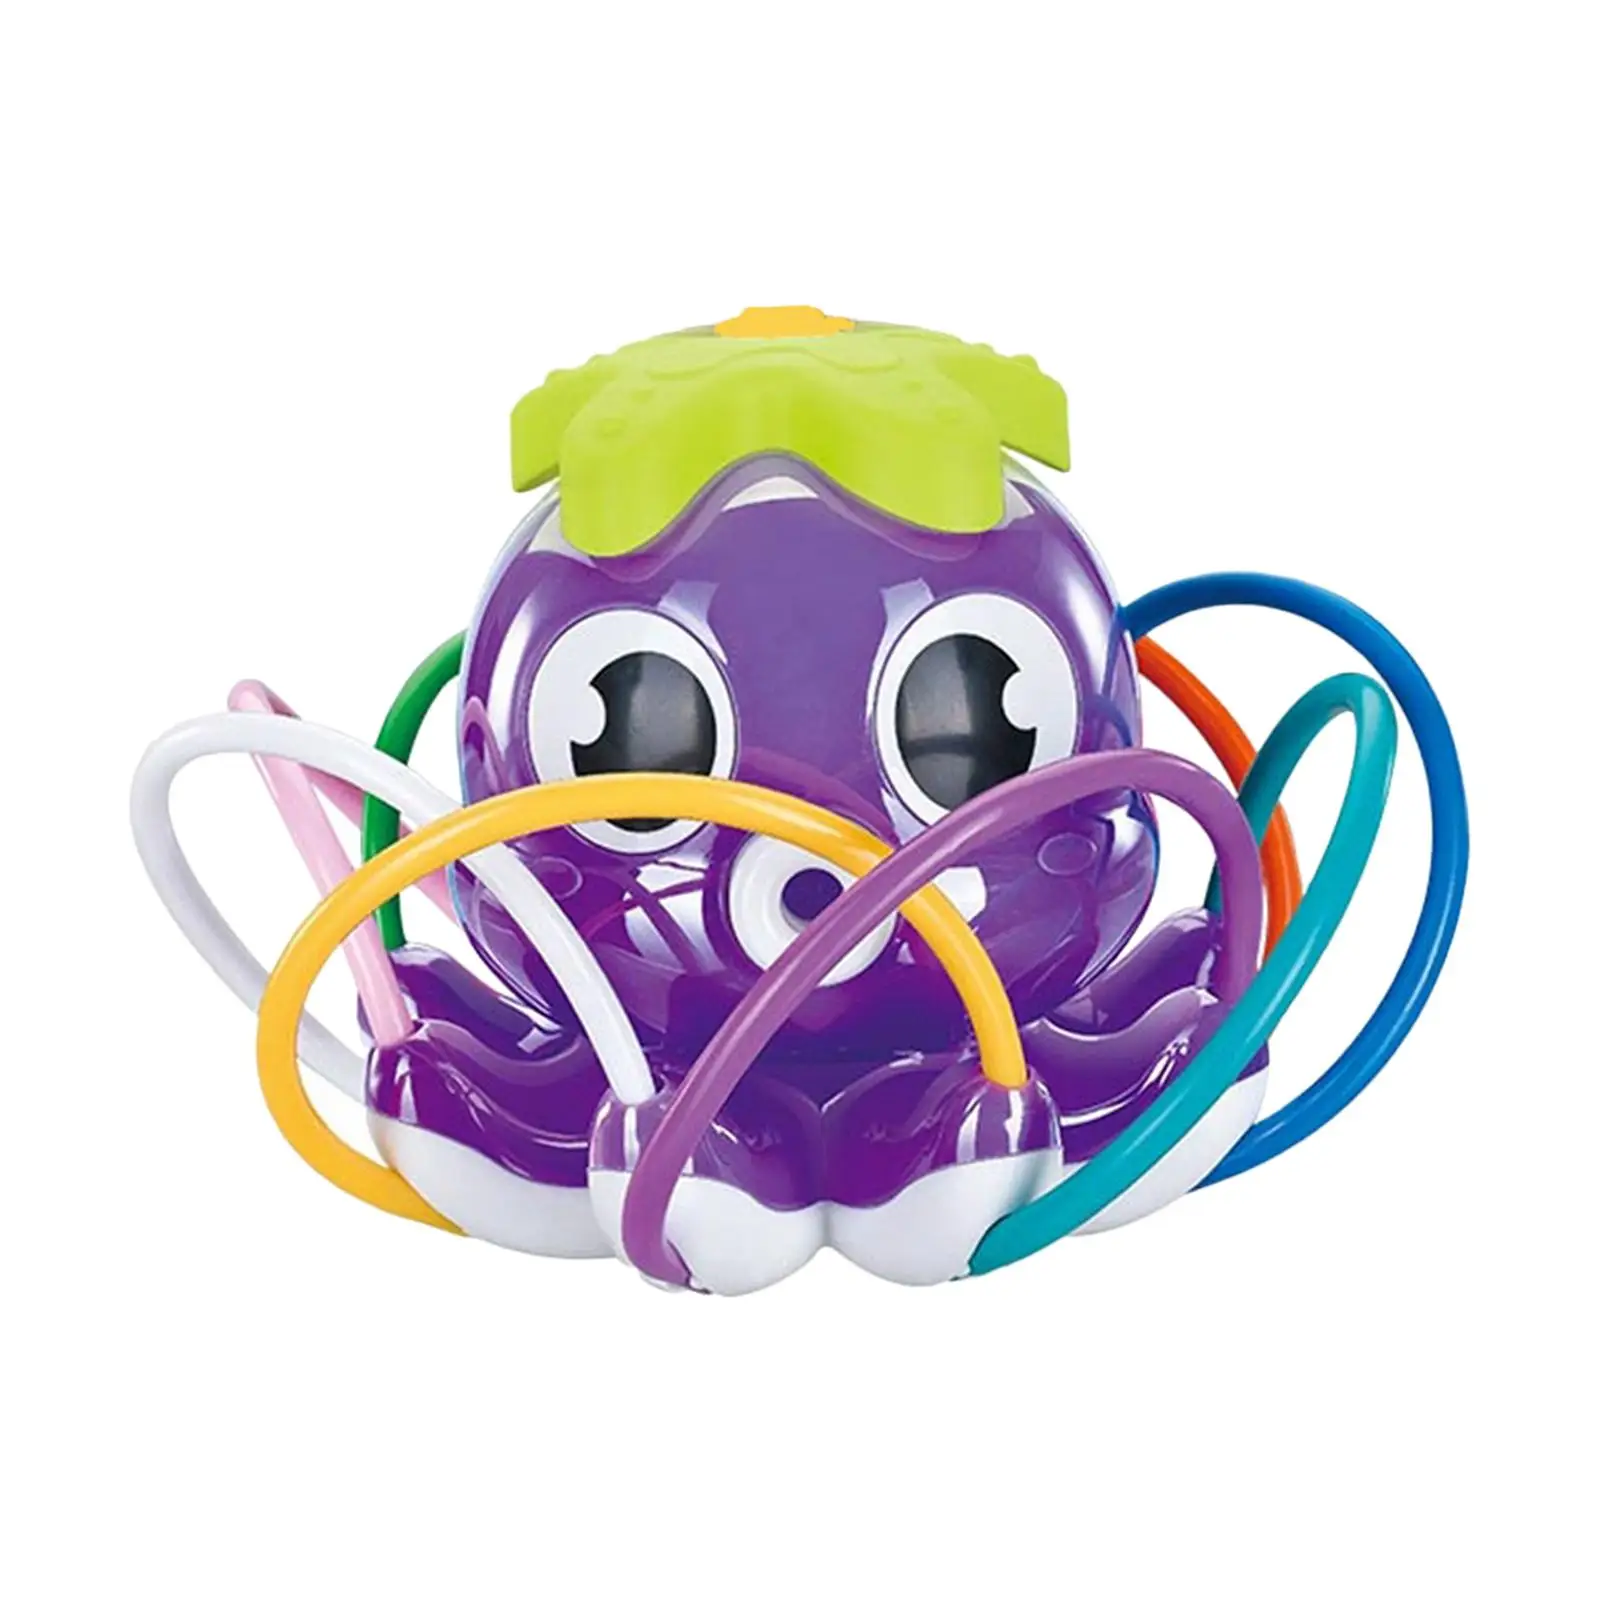 Octopus Sprinkler Toy with 8 Wiggle Tubes Outside Activities Summer Water Sprayer Toy for Pool Boys Girls Beach Parties